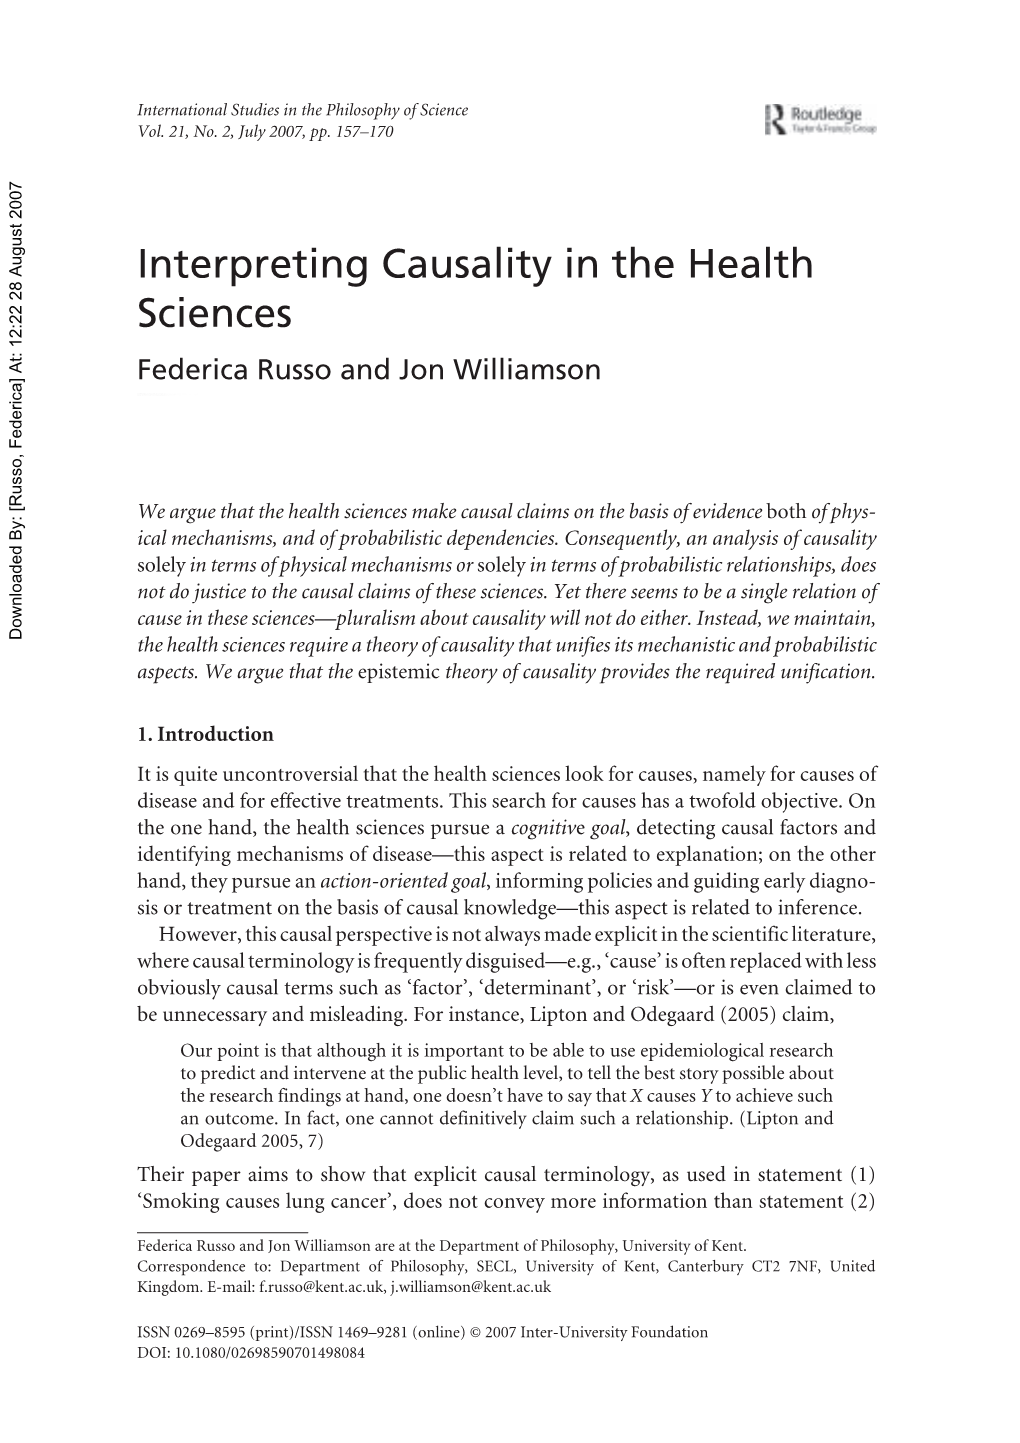 Interpreting Causality in the Health Sciences